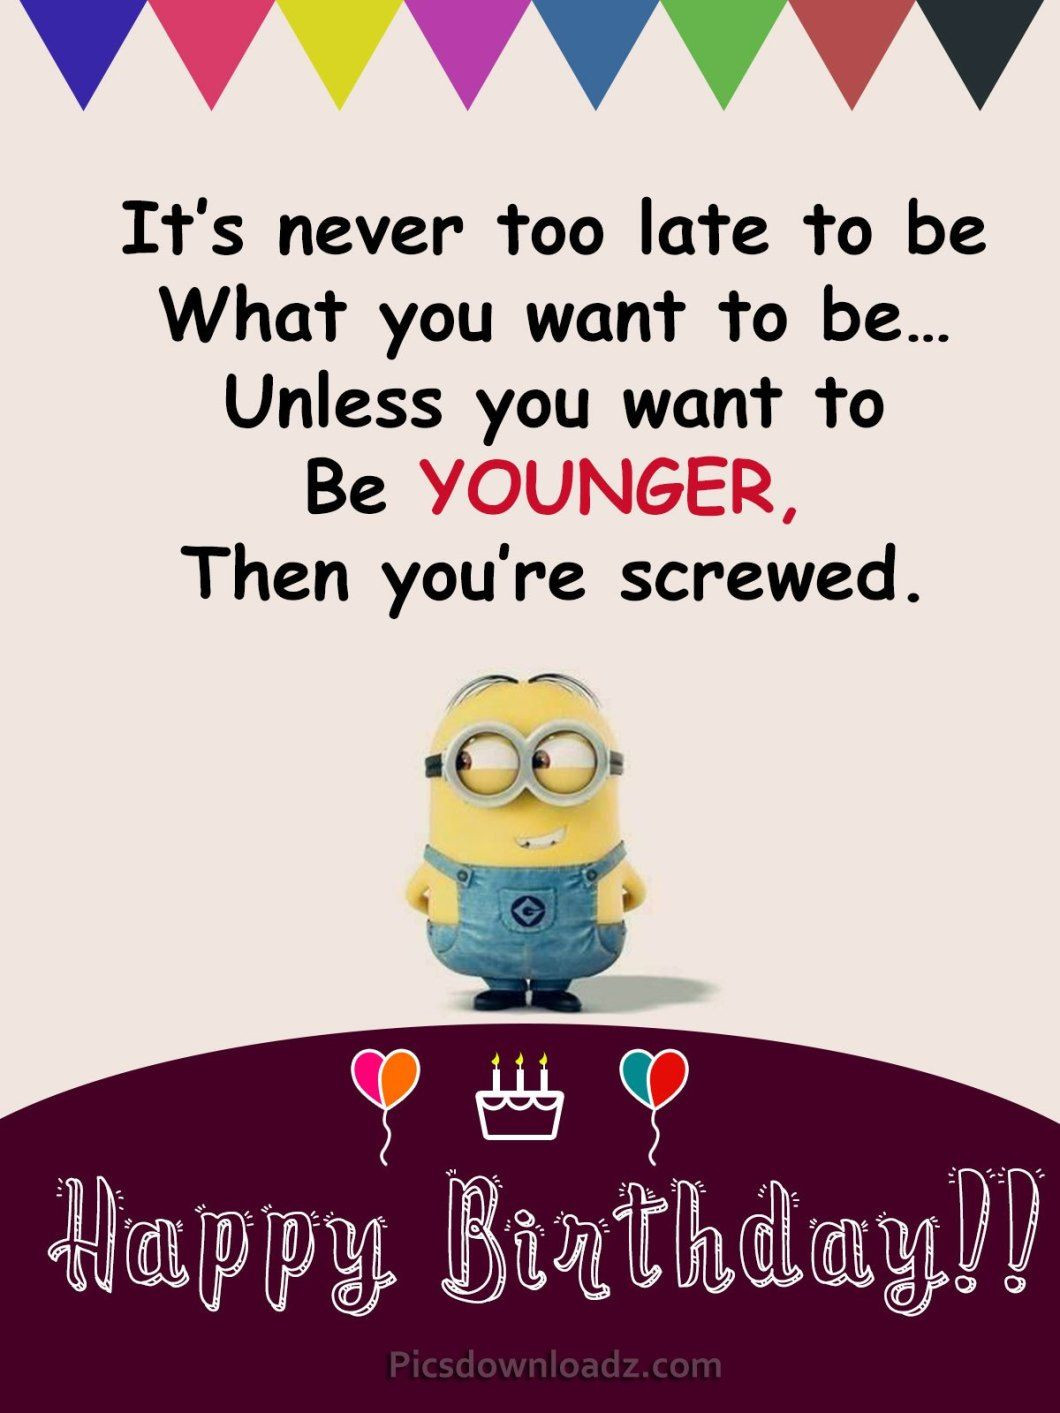 Funny Birthday Wishes For A Best Friend
 Funny Happy Birthday Wishes for Best Friend – Happy